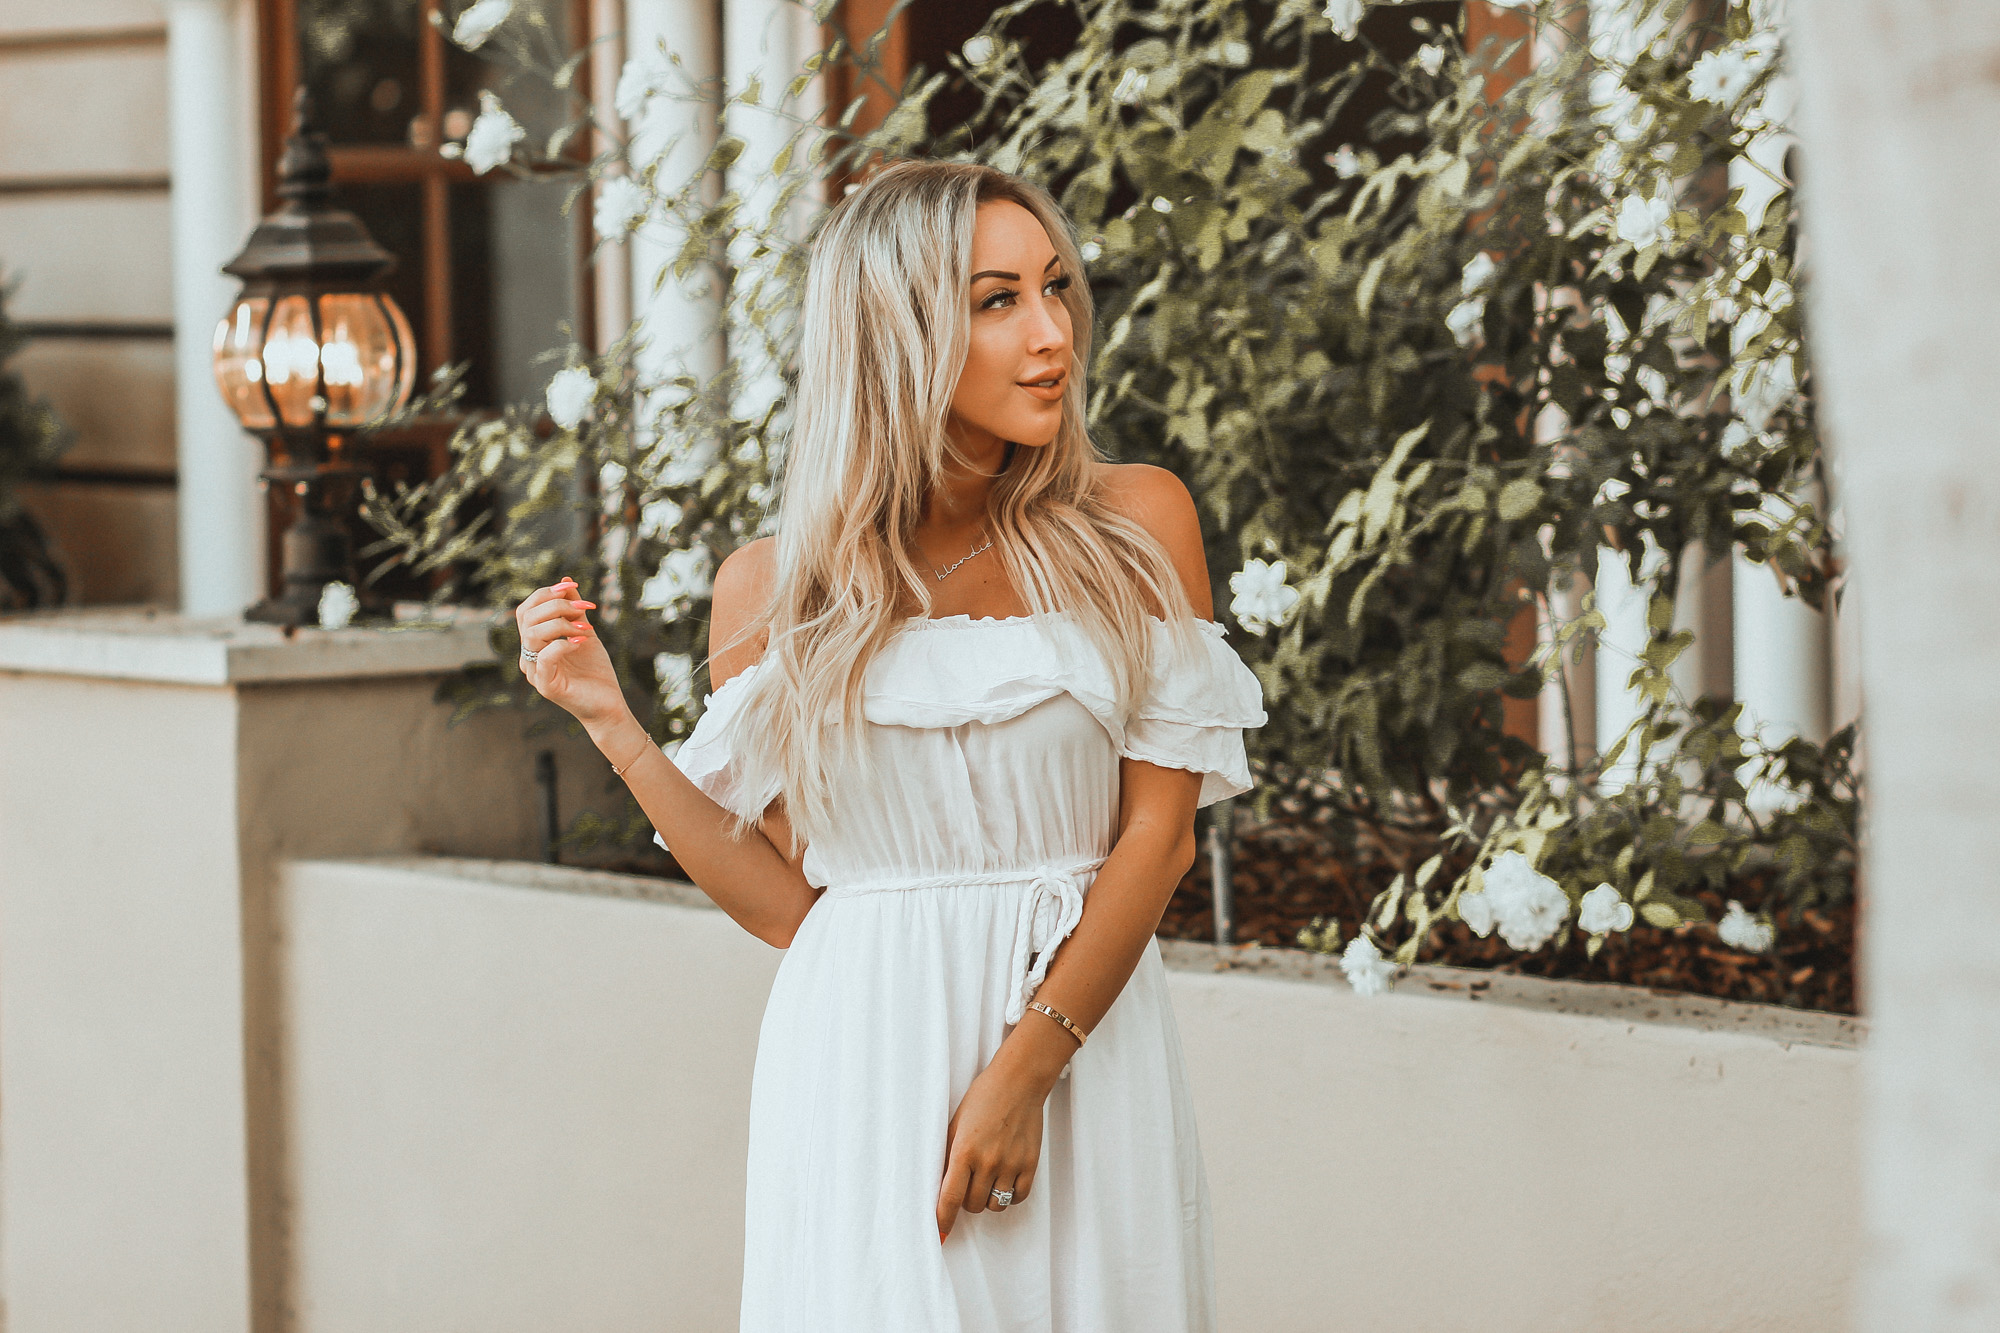 White Bohemian Maxi Dress | Bride-to-be Dress | White Dress for Bridal Shower | Blondie in the City by Hayley Larue